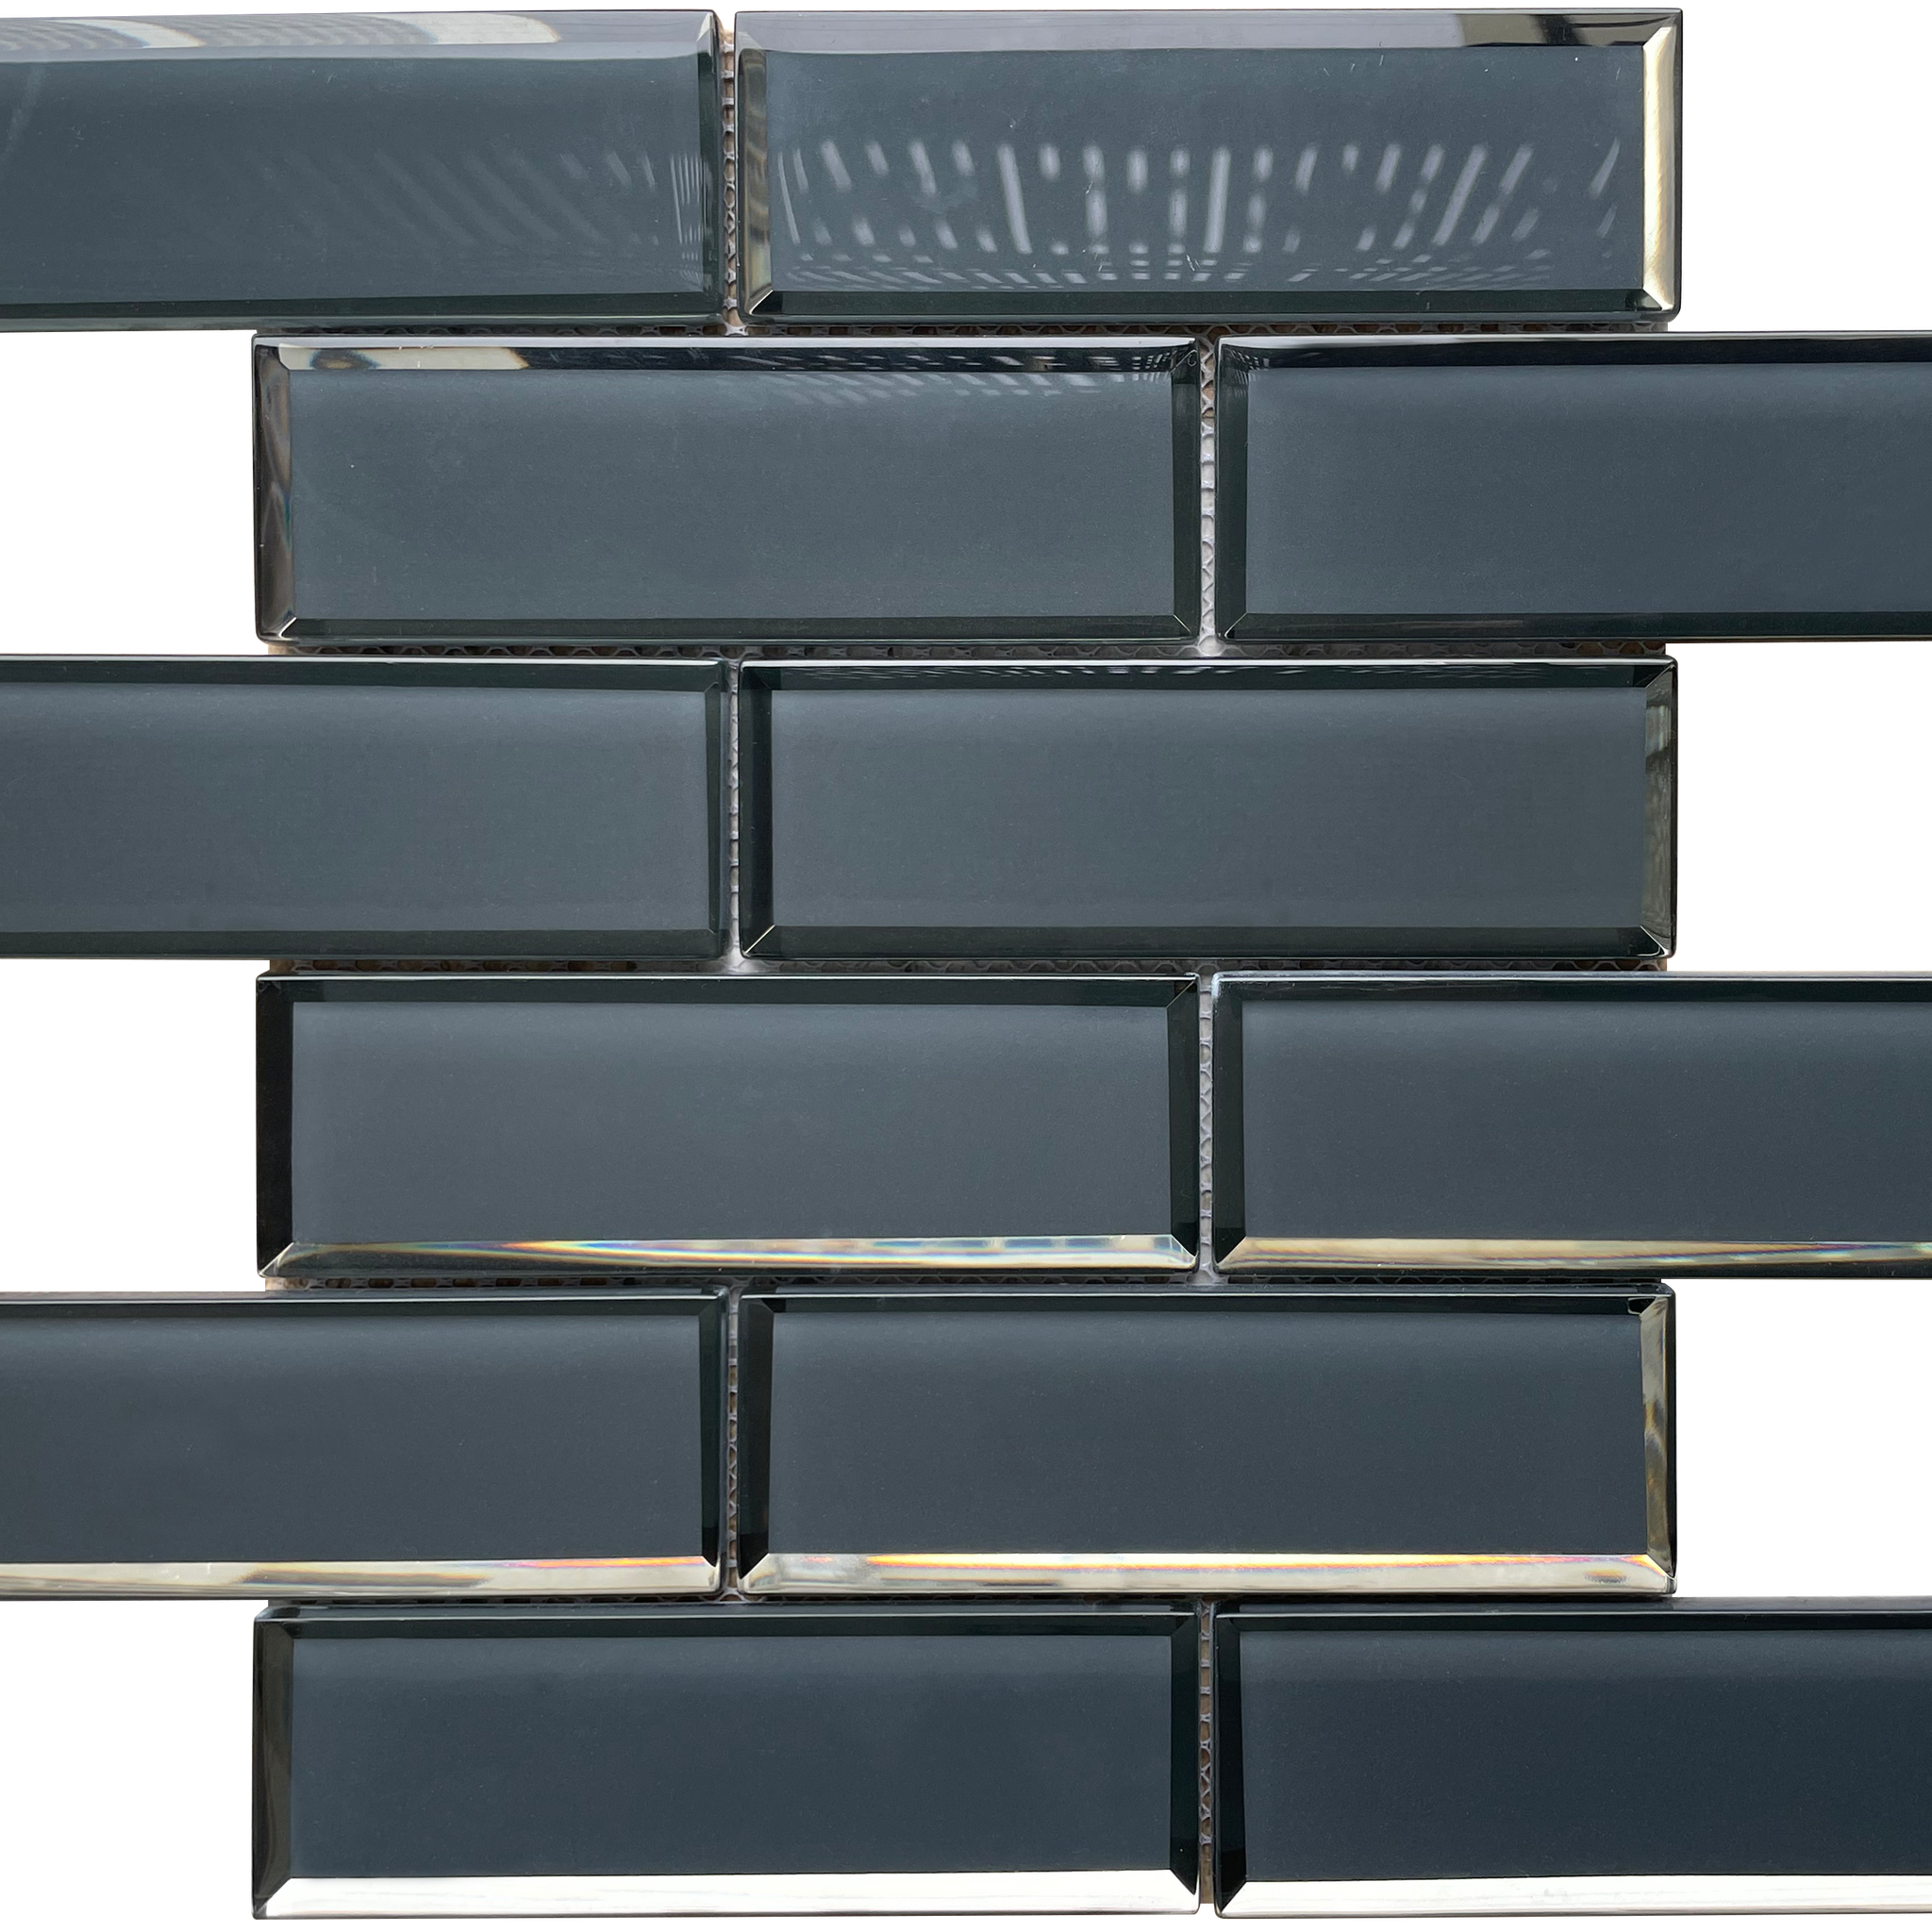 12 x 12 inch Glass Mosaic Tile with Dark Grey Color